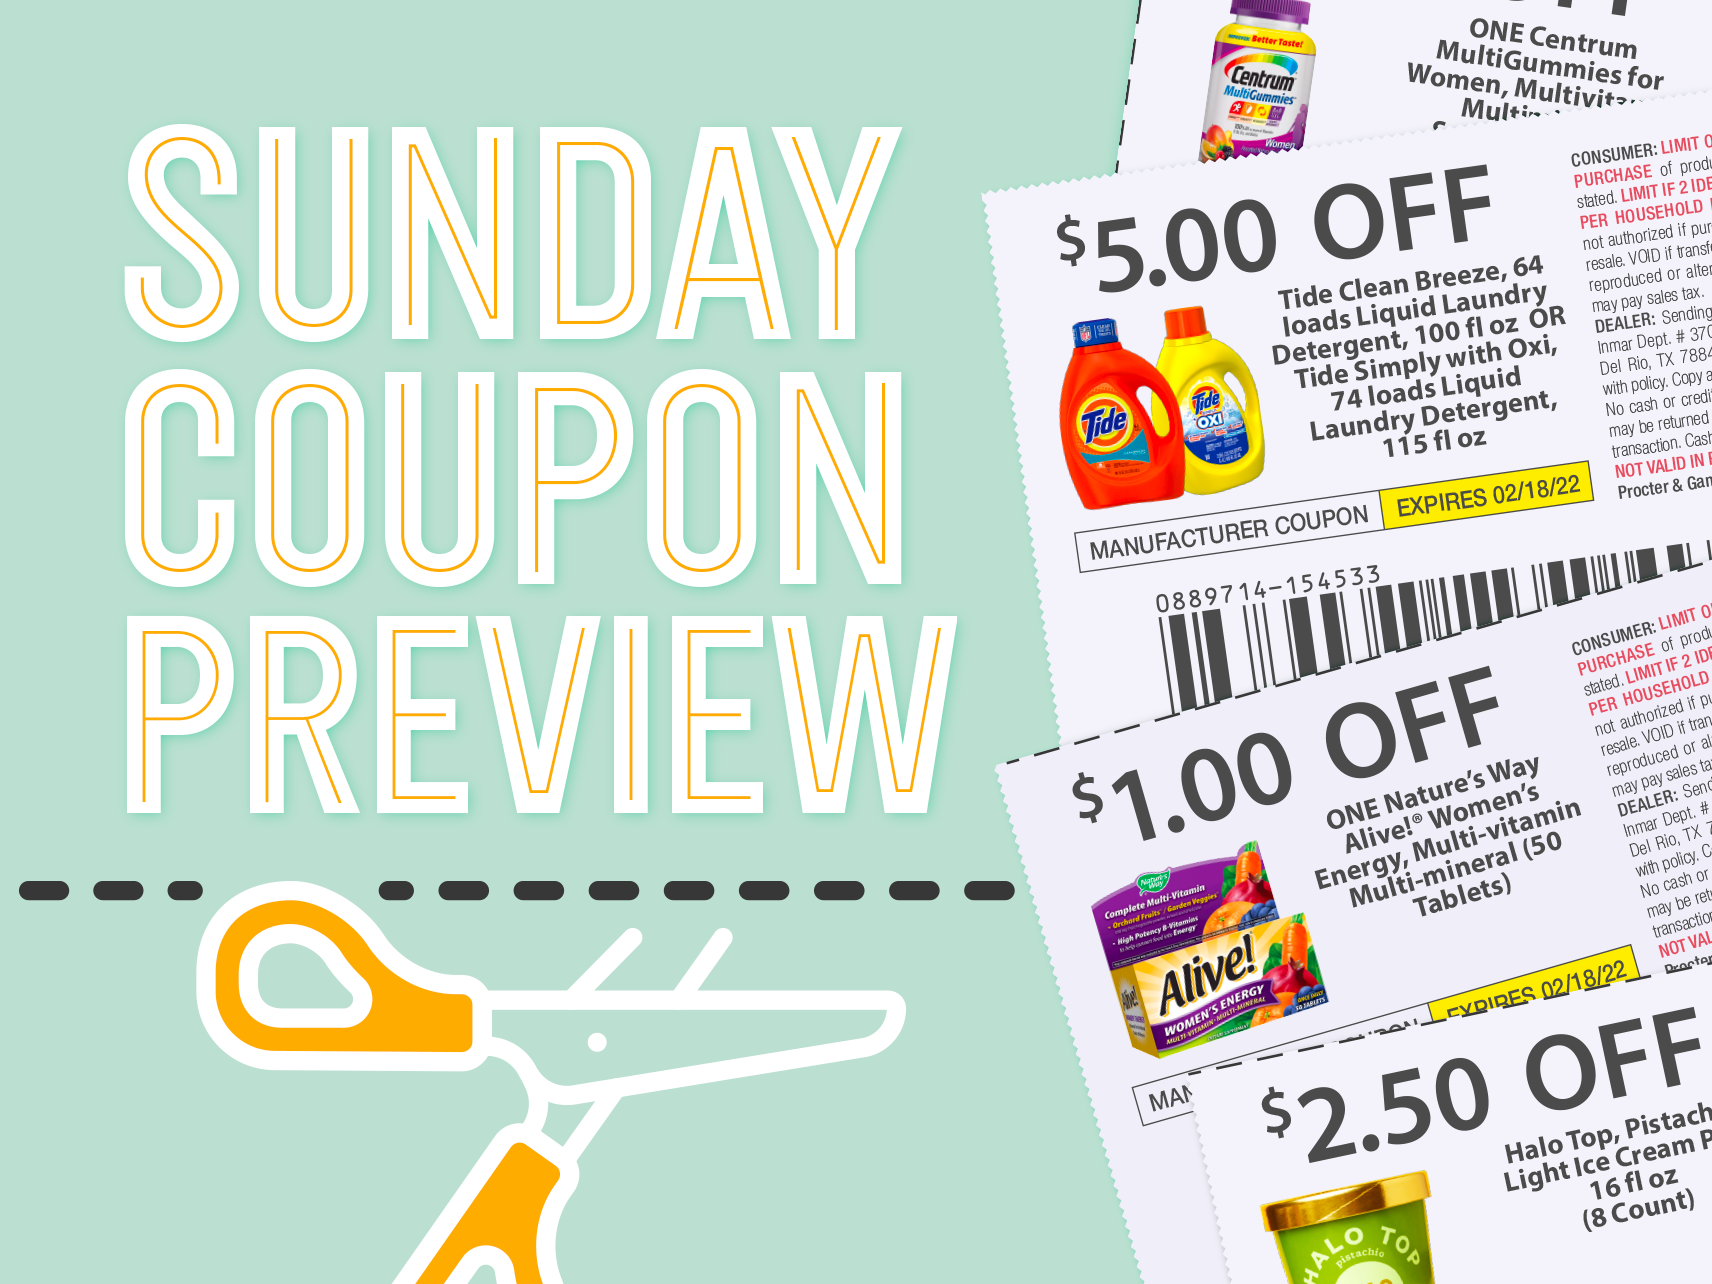 Sunday Coupon Preview For 9/18 – One Insert